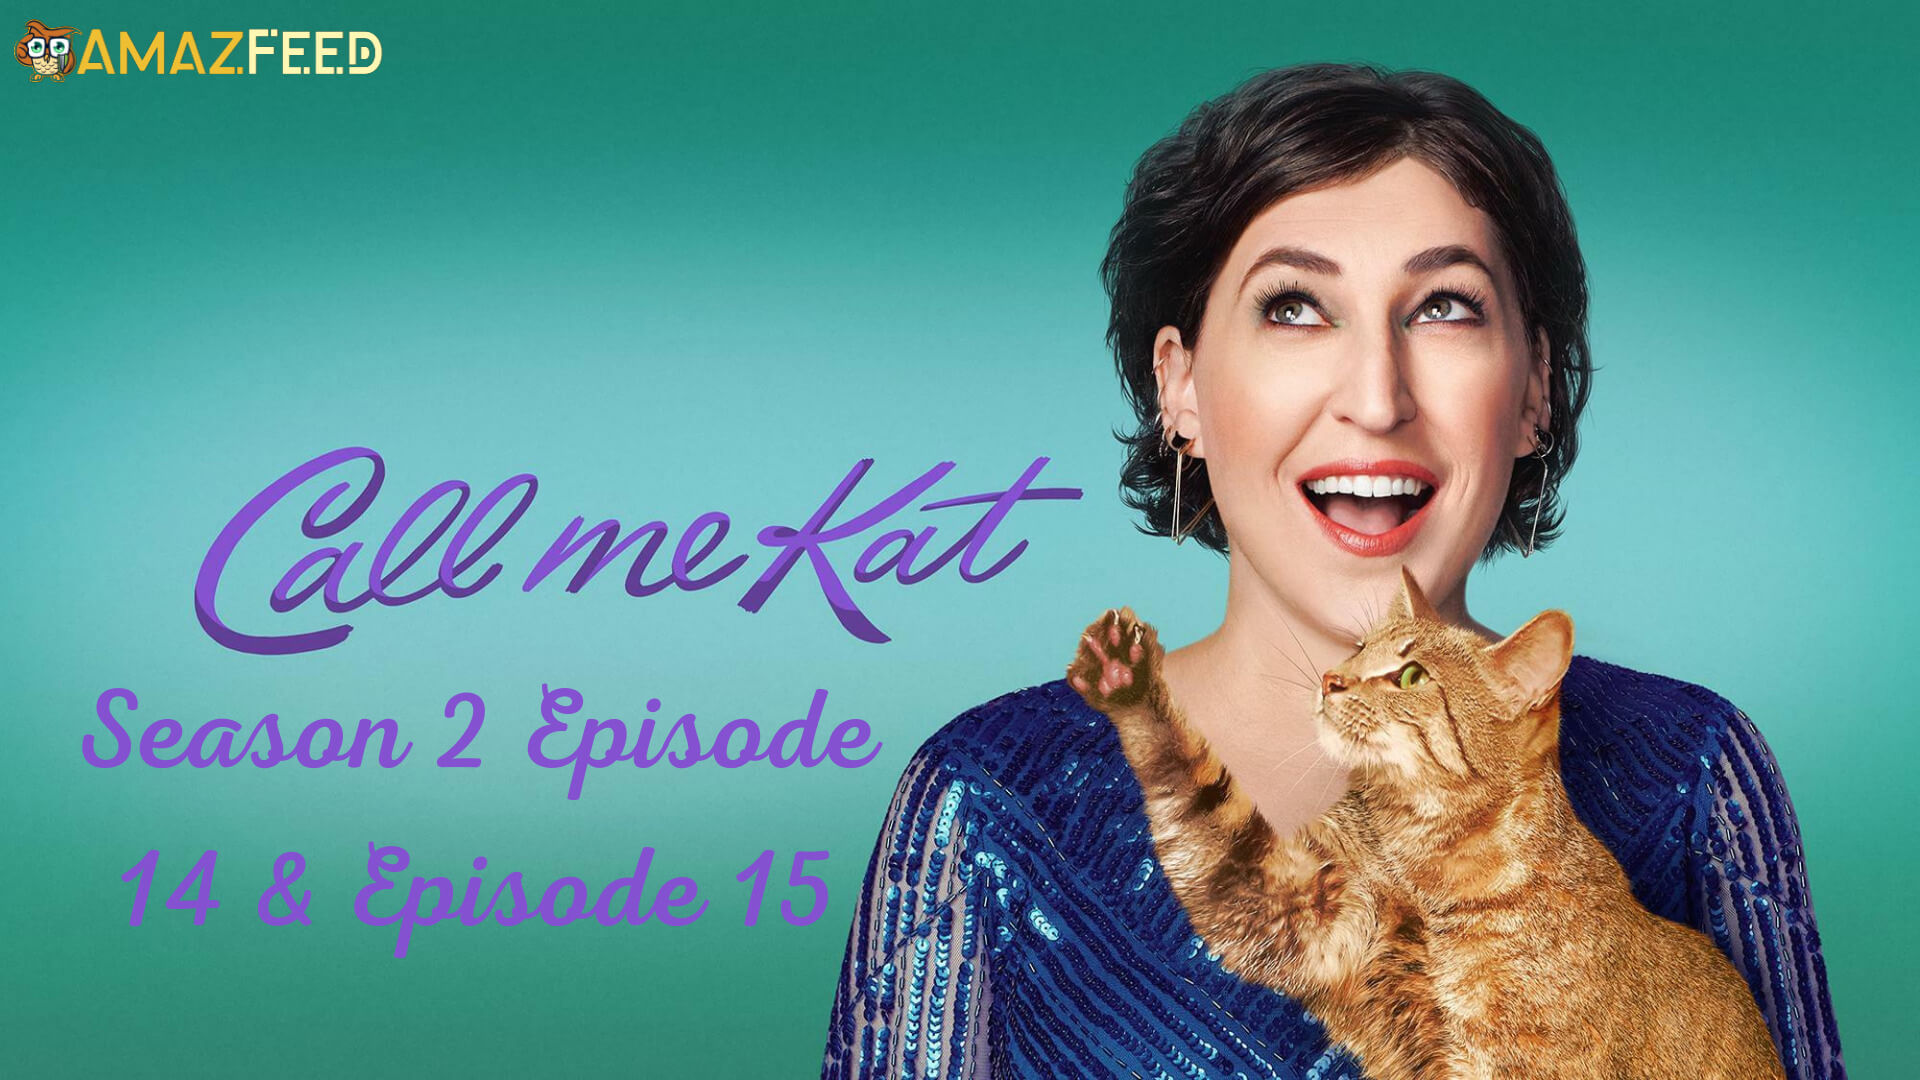 Who Will Be Part Of Call Me Kat Season 2 Episode 14 & Episode 15